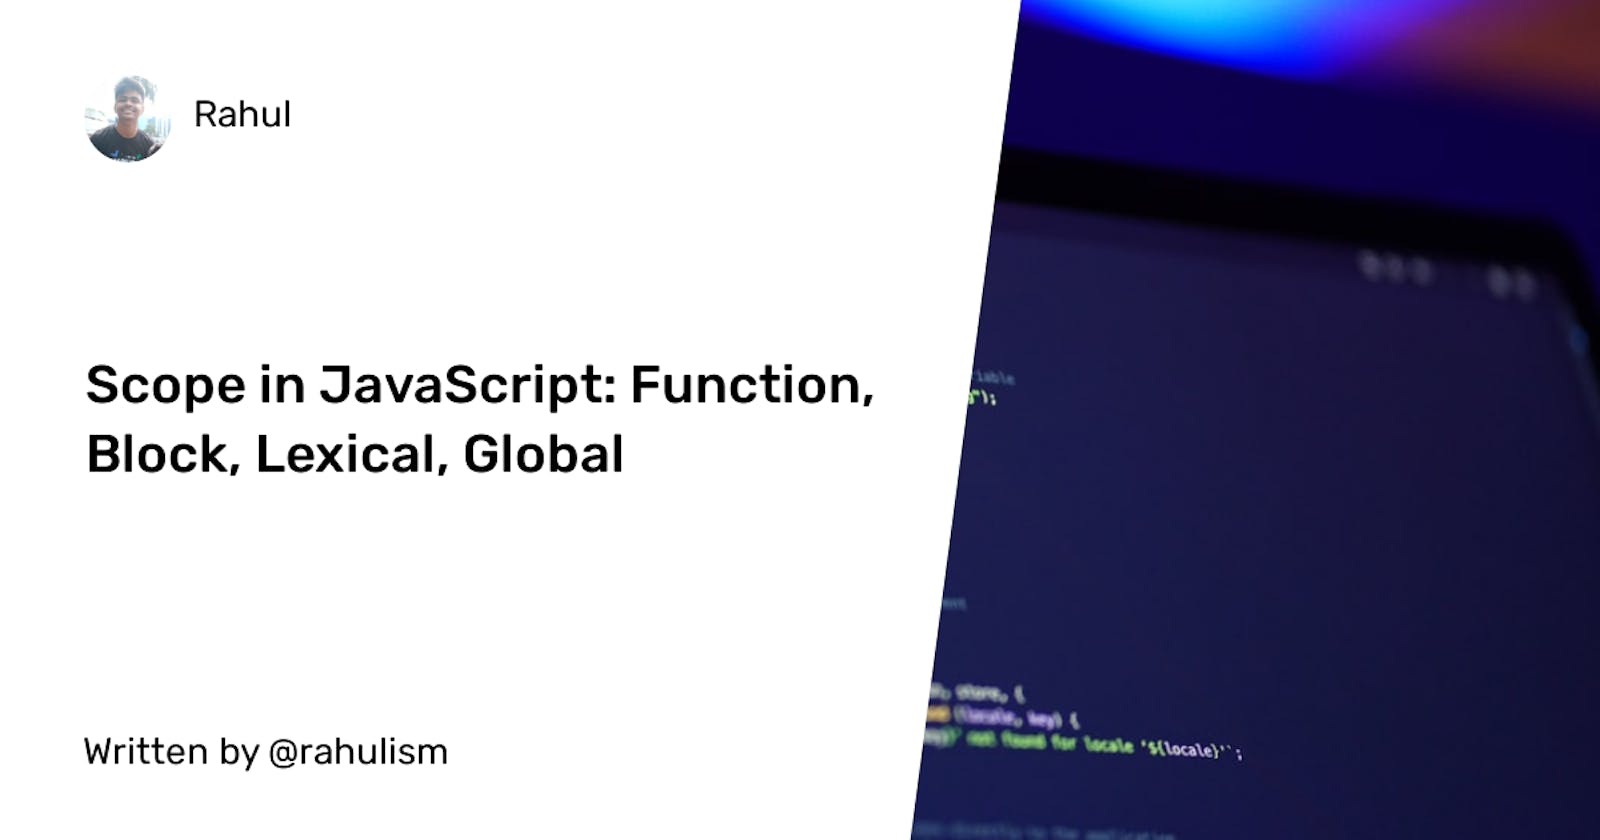 Scope in JavaScript: Function, Block, Lexical, Global